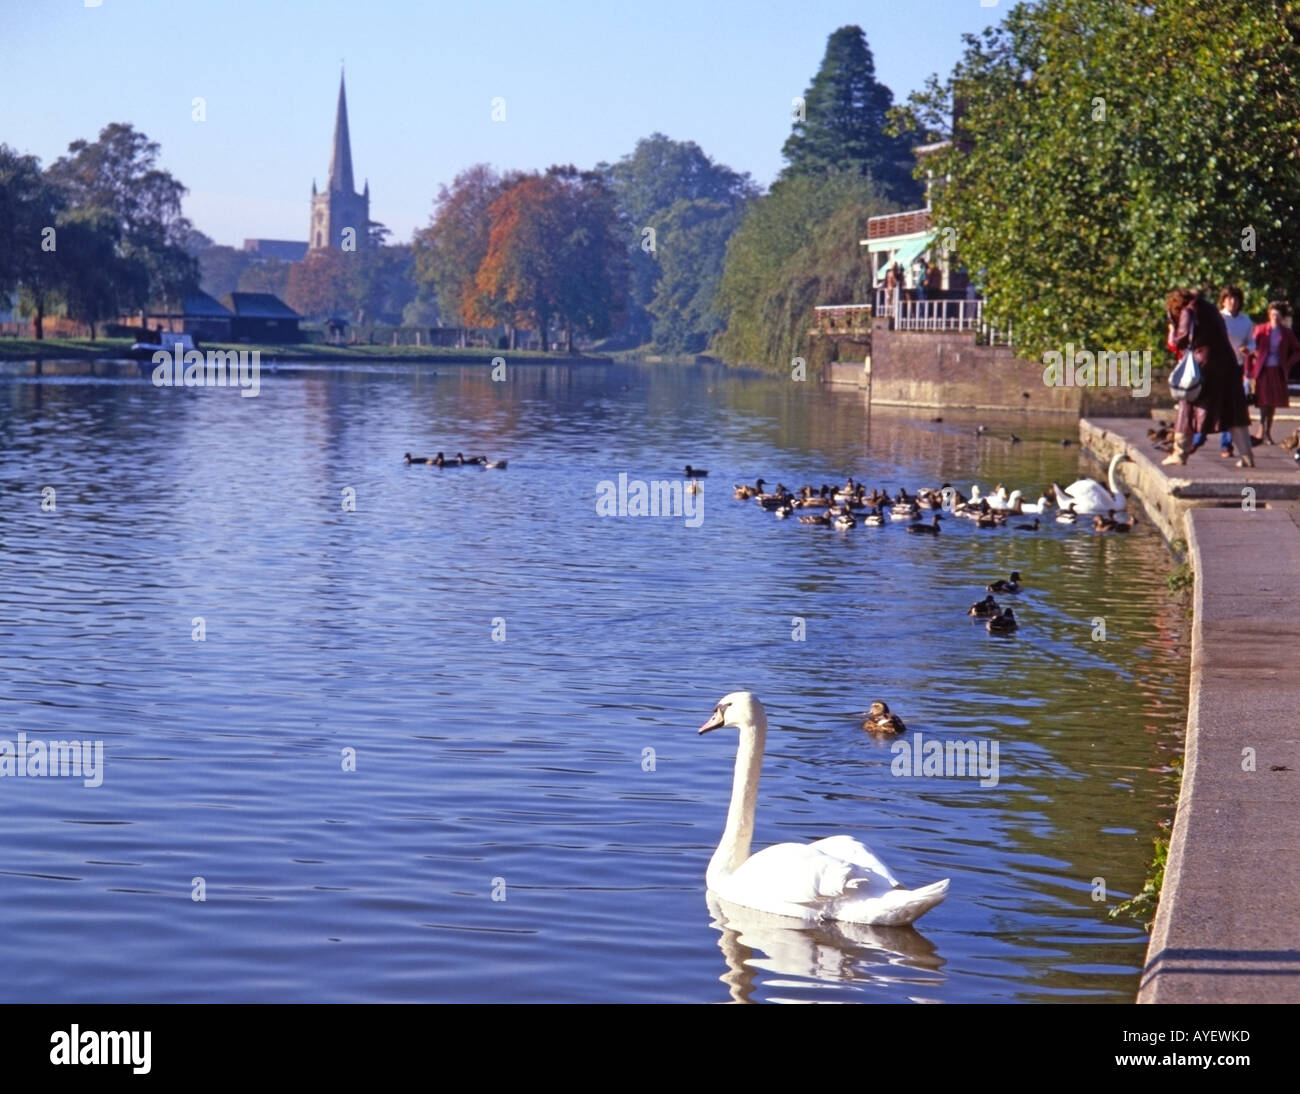 The River Avon at Stratford-upon-Avon, Warwichshire, England. Holy Trinity Church in background Stock Photo